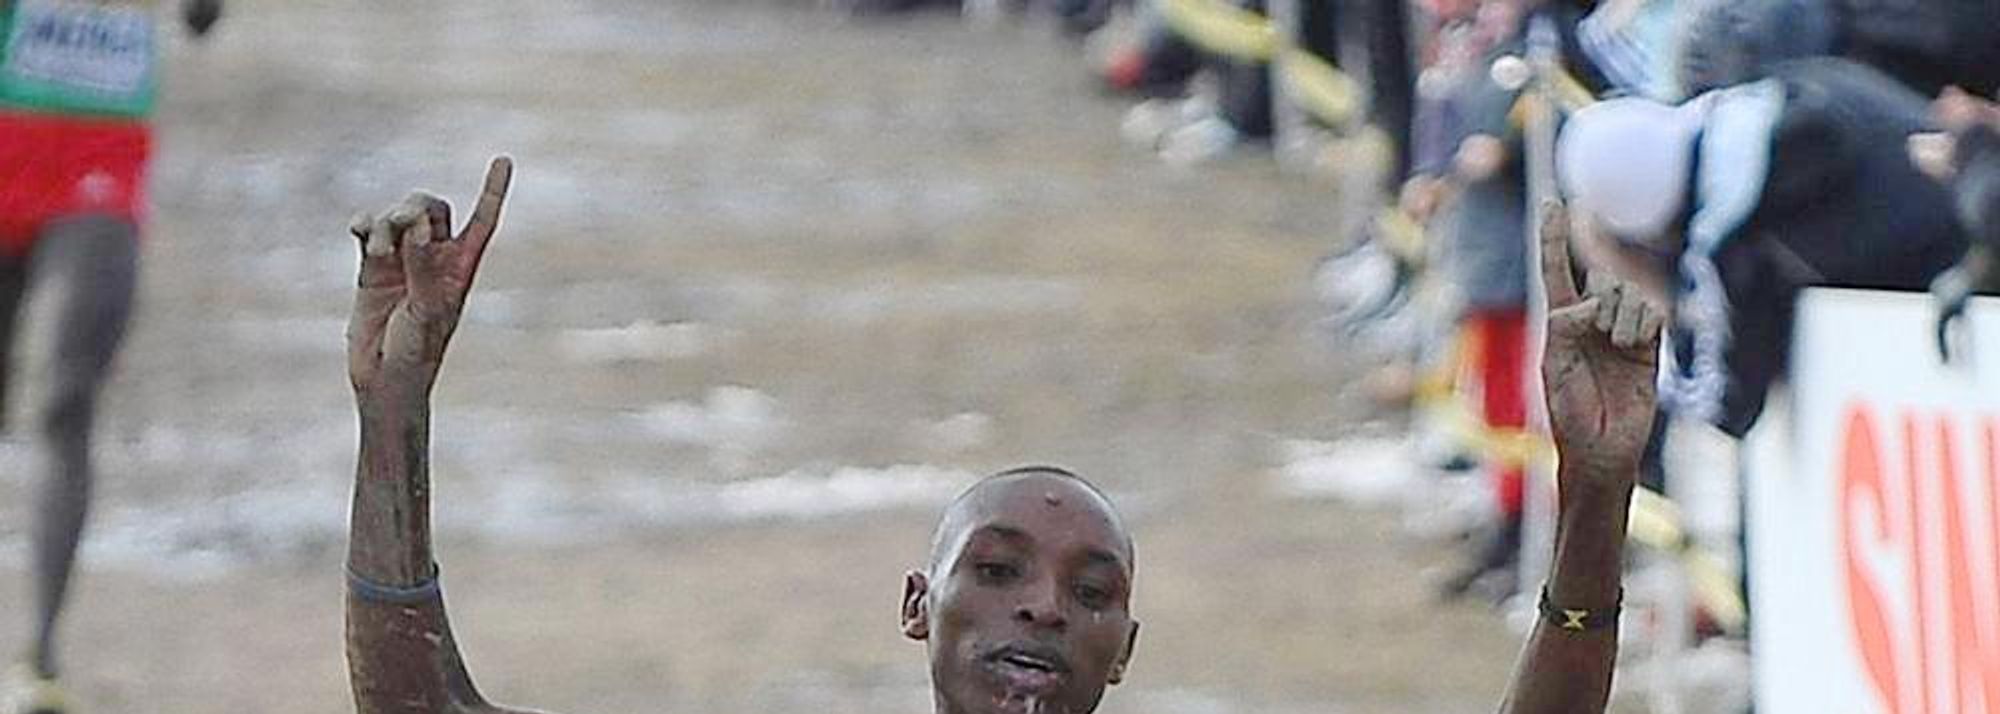 On a day when three other titles went to athletes who were the favourites, or among the leading candidates, Kenya’s Japhet Korir provided the one genuine surprise in taking the senior men’s title at the 2013 IAAF World Cross Country Championships on Sunday (24), pocketing a cheque of US$30,000.